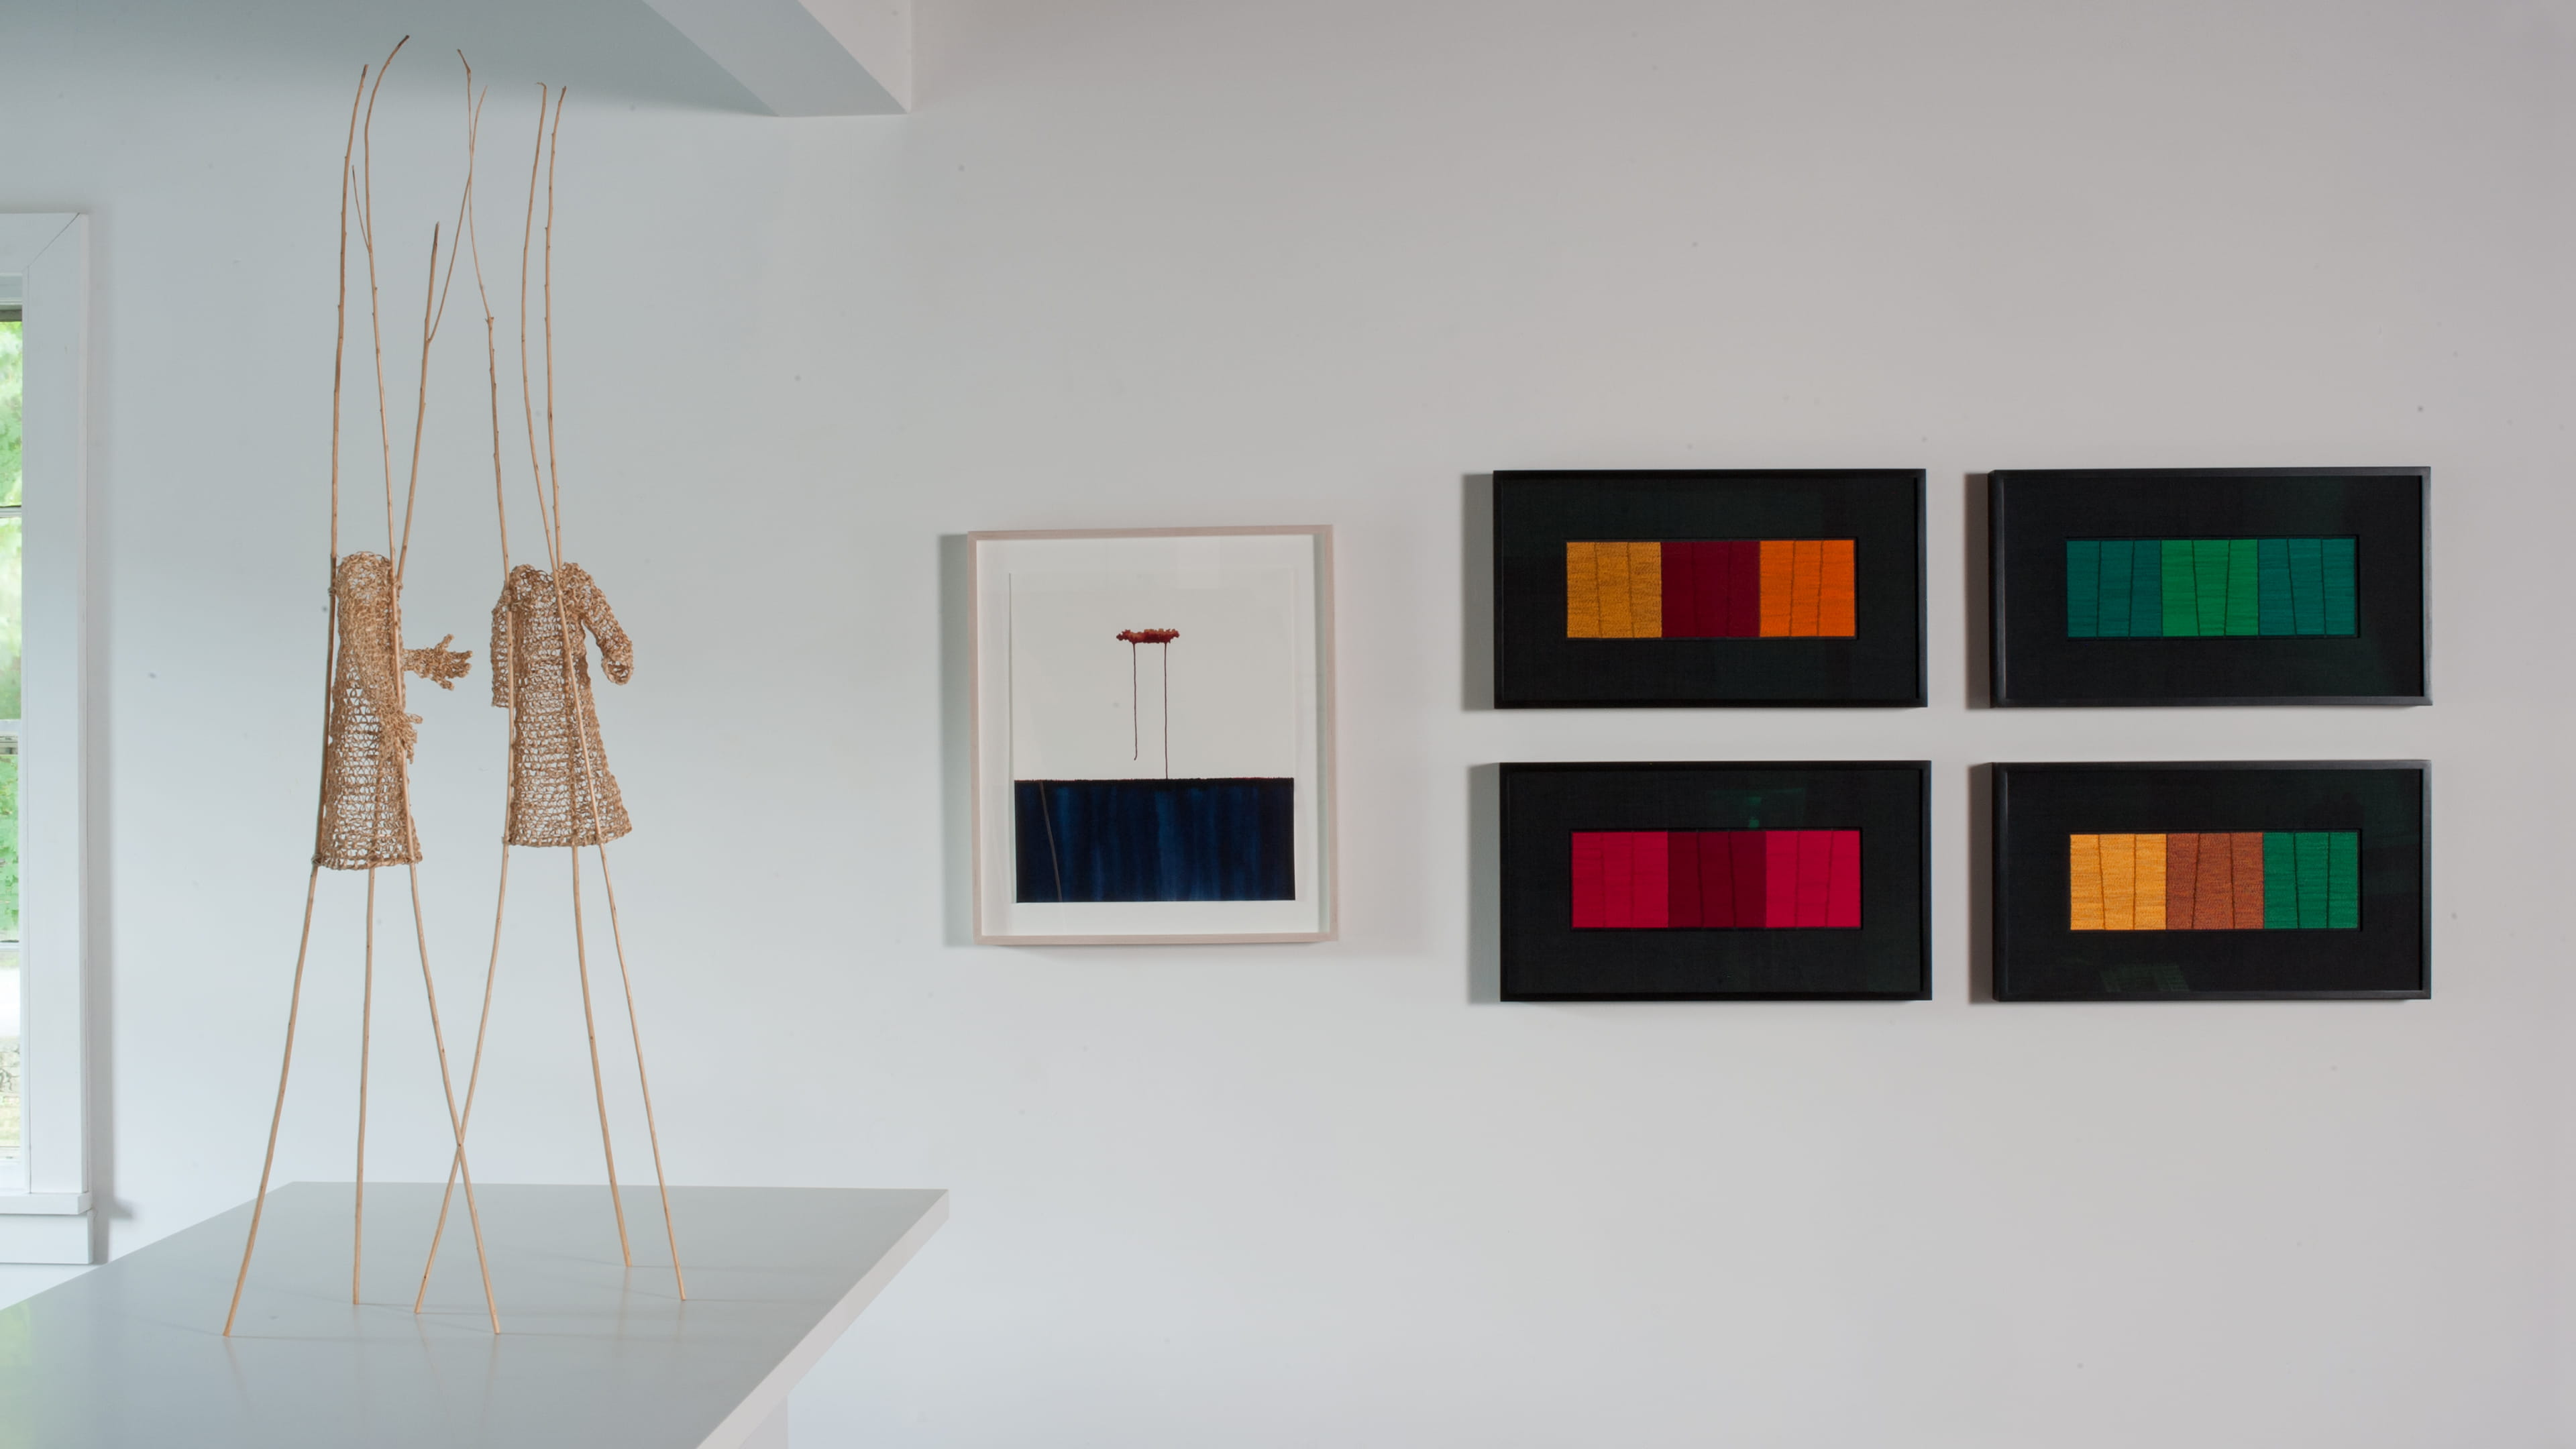 works by Stéphanie Jacques and Scott Rothstein